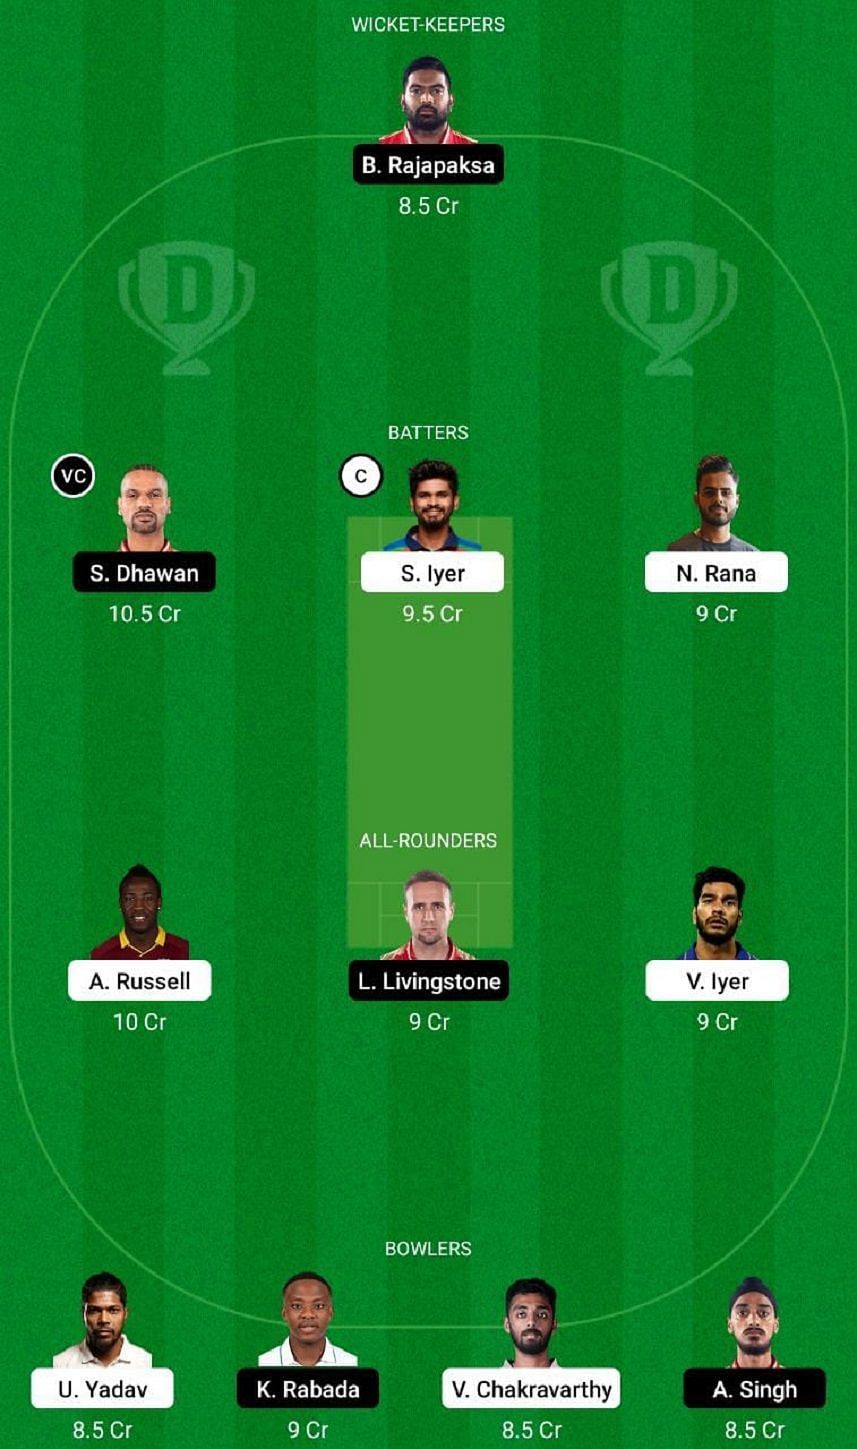 Kkr Vs Pbks Dream11 Prediction Fantasy Cricket Tips Todays Playing 11 And Pitch Report For